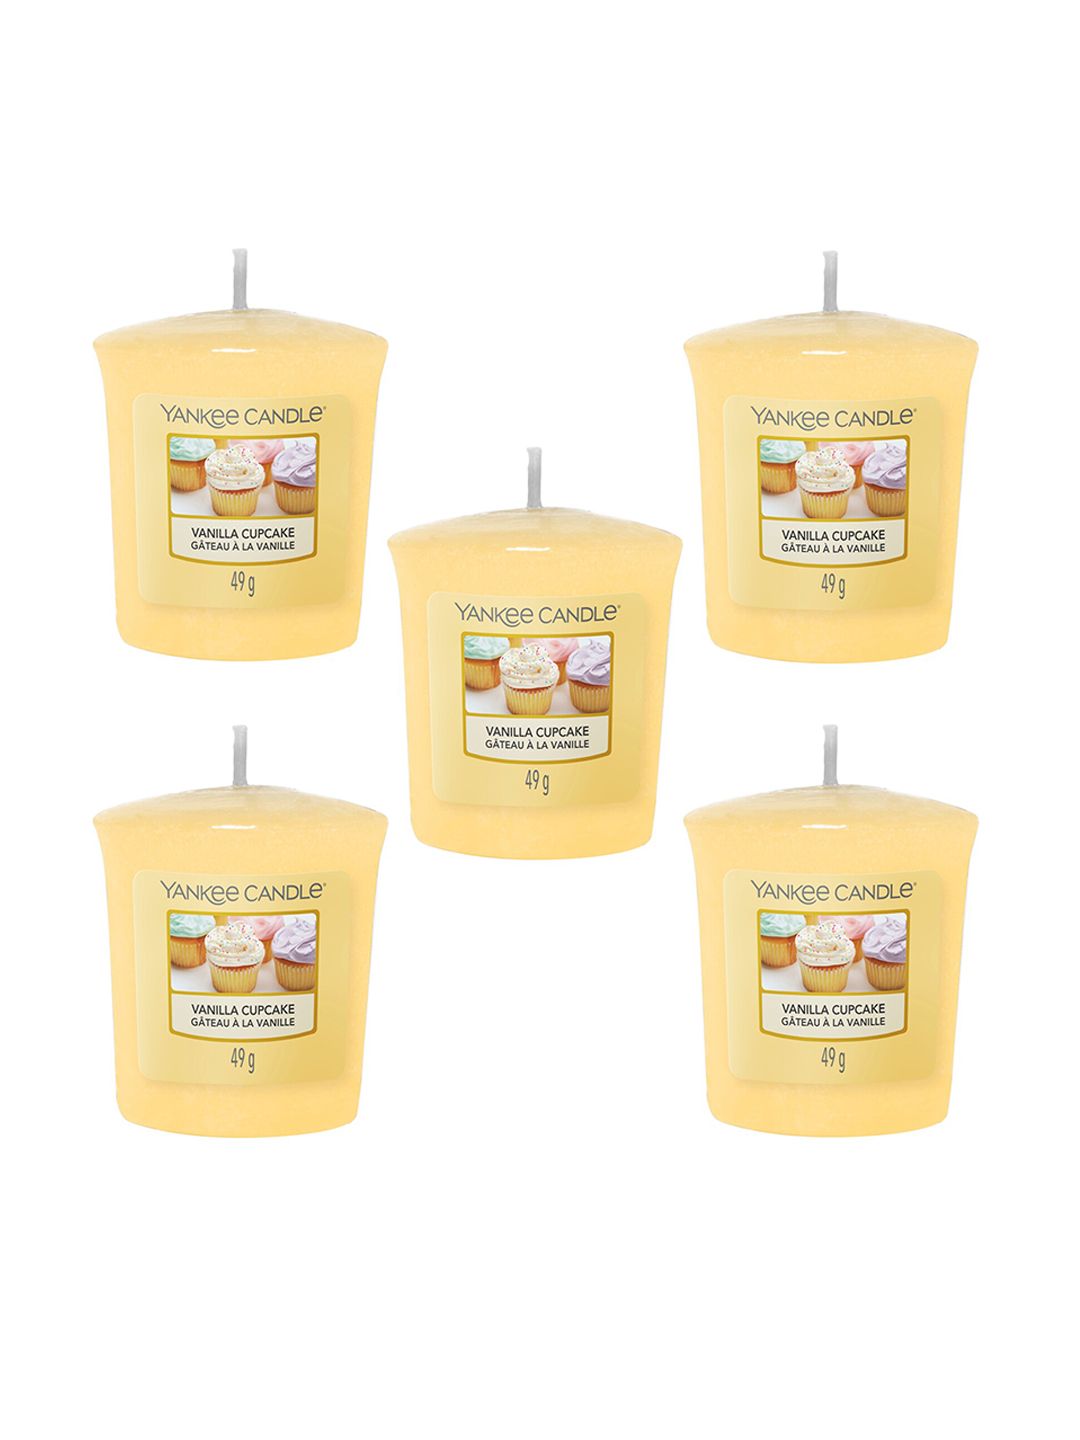 YANKEE CANDLE Set Of 5 Yellow Solid Classic Votive Vanilla Cupcake Scented Candles Price in India